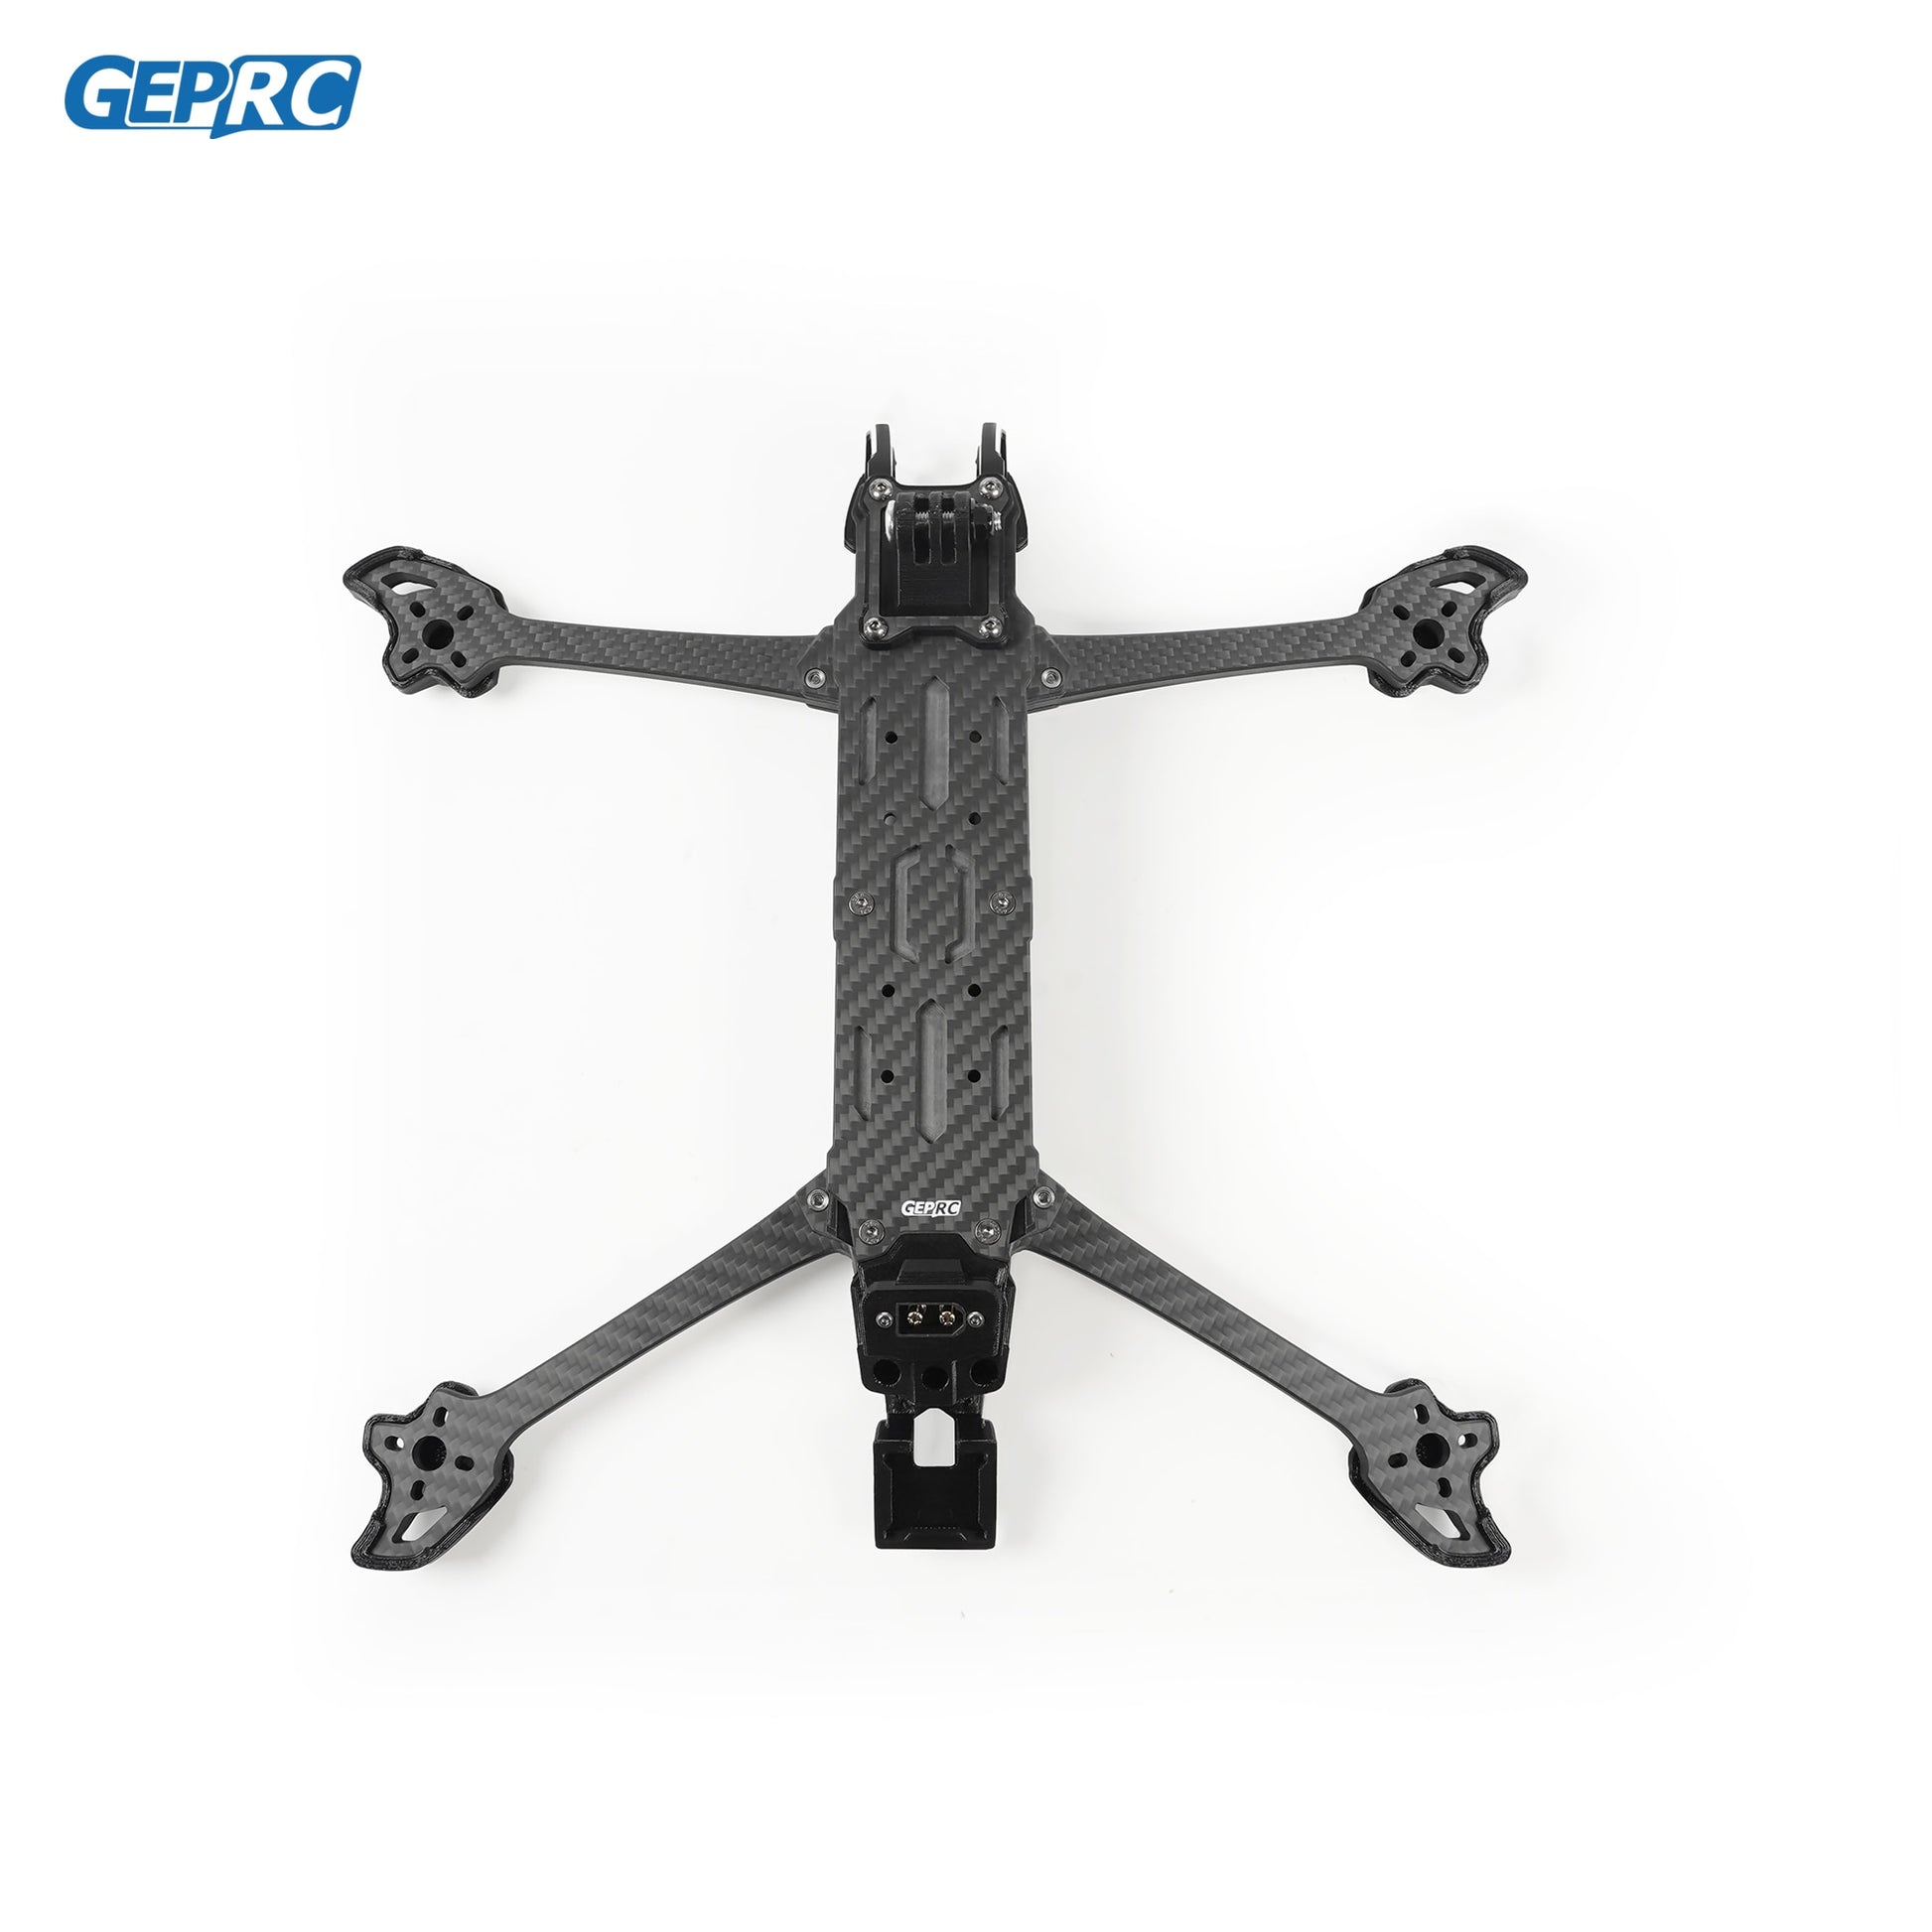 GEP-MOZ7 Frame 7Inch Parts Propeller Accessory - Base Quadcopter FPV Freestyle RC Racing Drone MOZ7